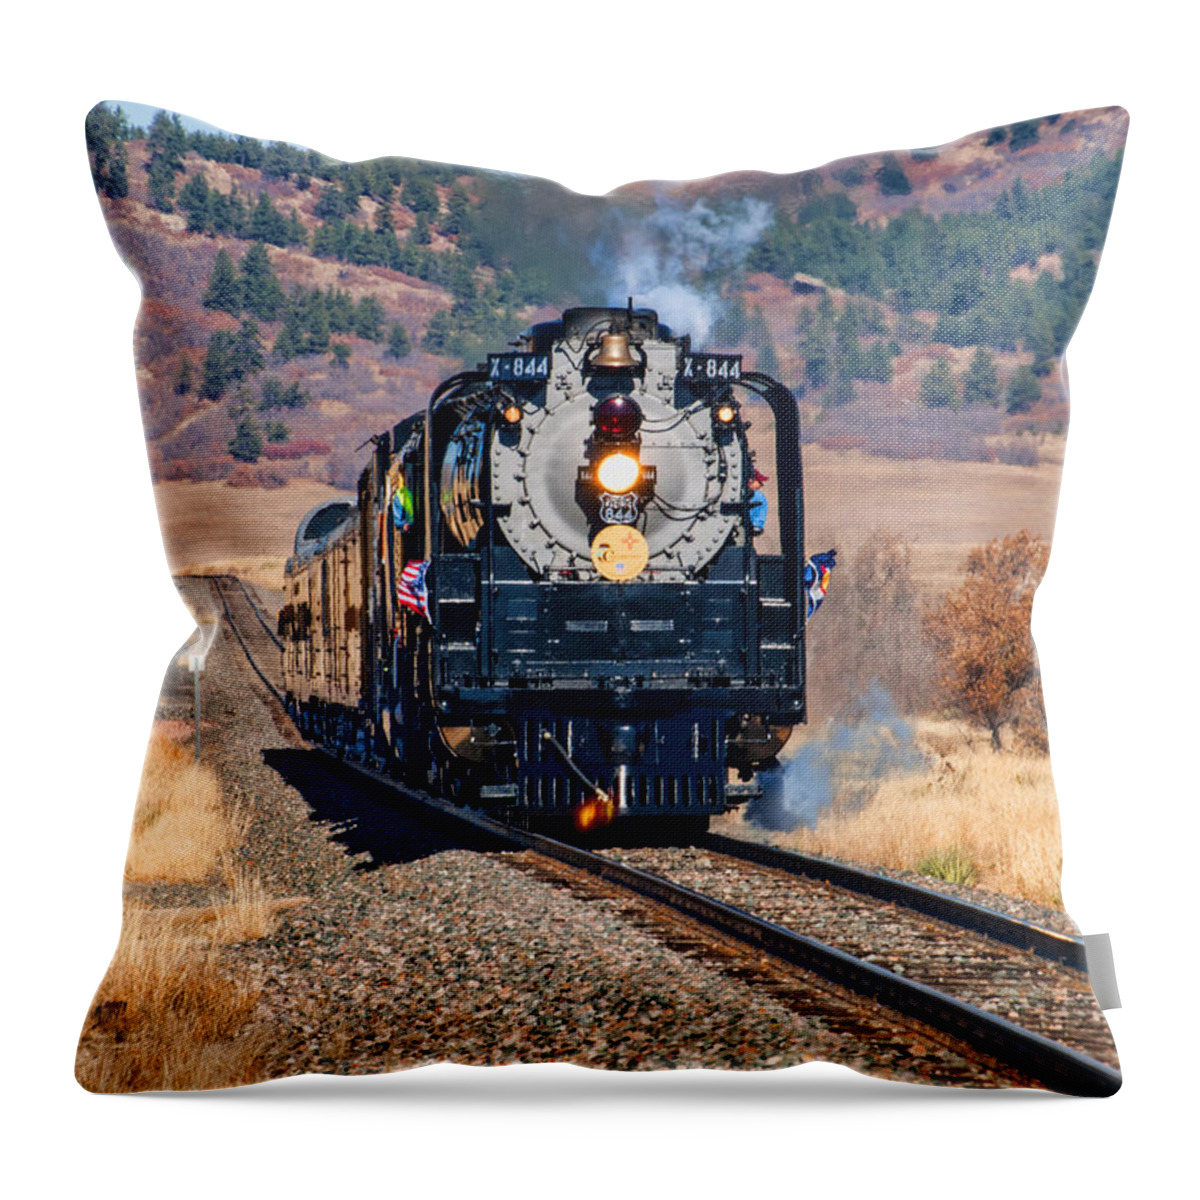 Locomotive Throw Pillow featuring the photograph Union Pacific 844 by Alana Thrower